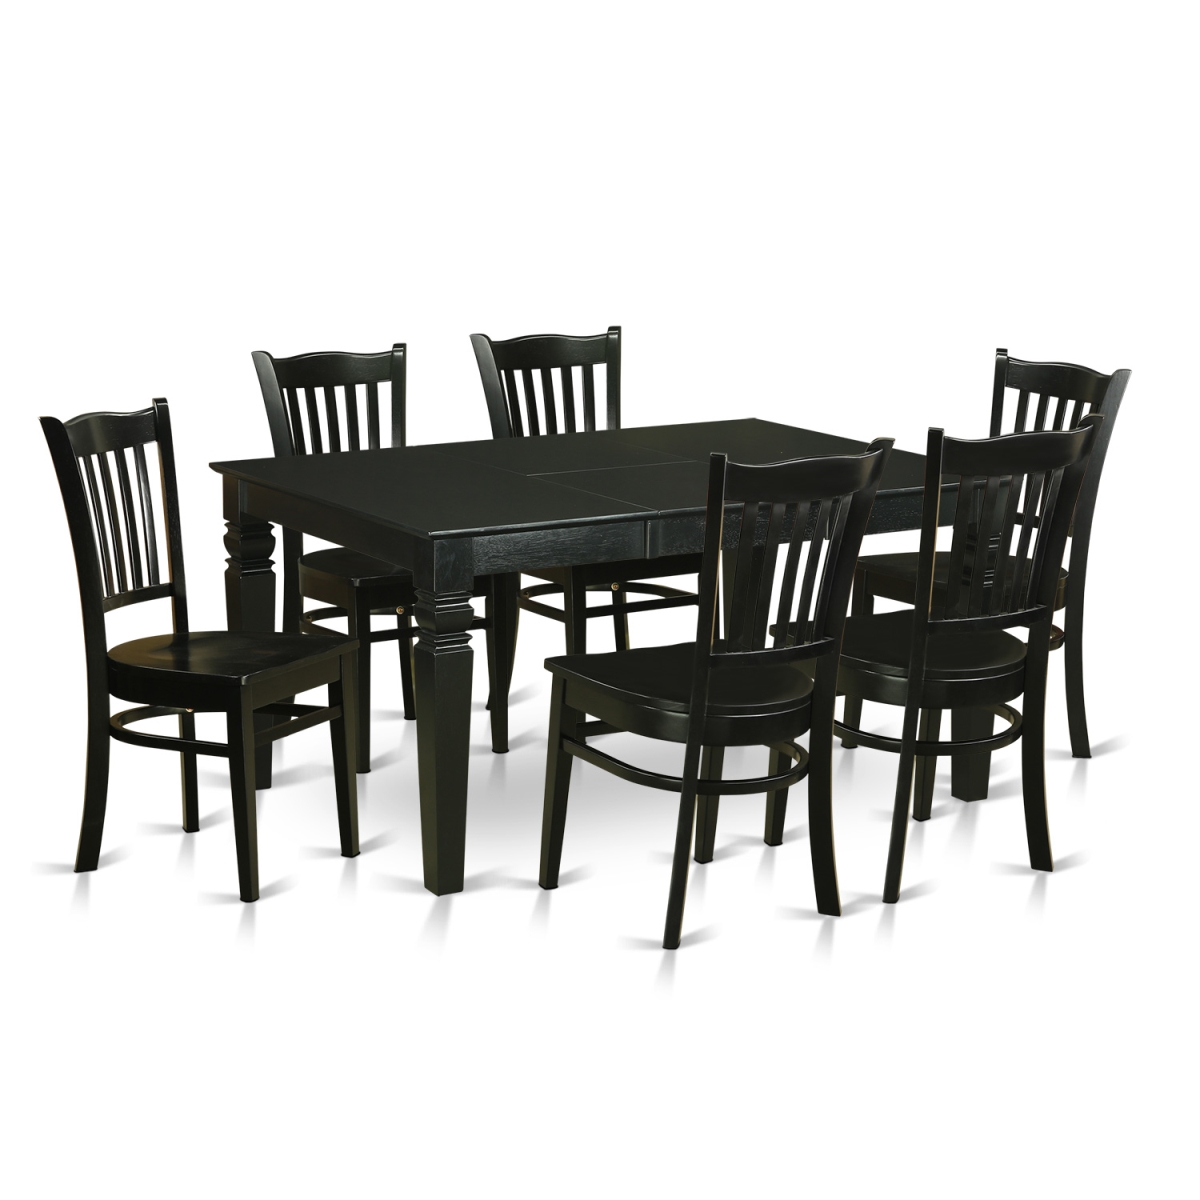 WEGR7-BLK-W Dining Room Sets with 6 Table & 6 Chairs, Black - 7 Piece -  East West Furniture